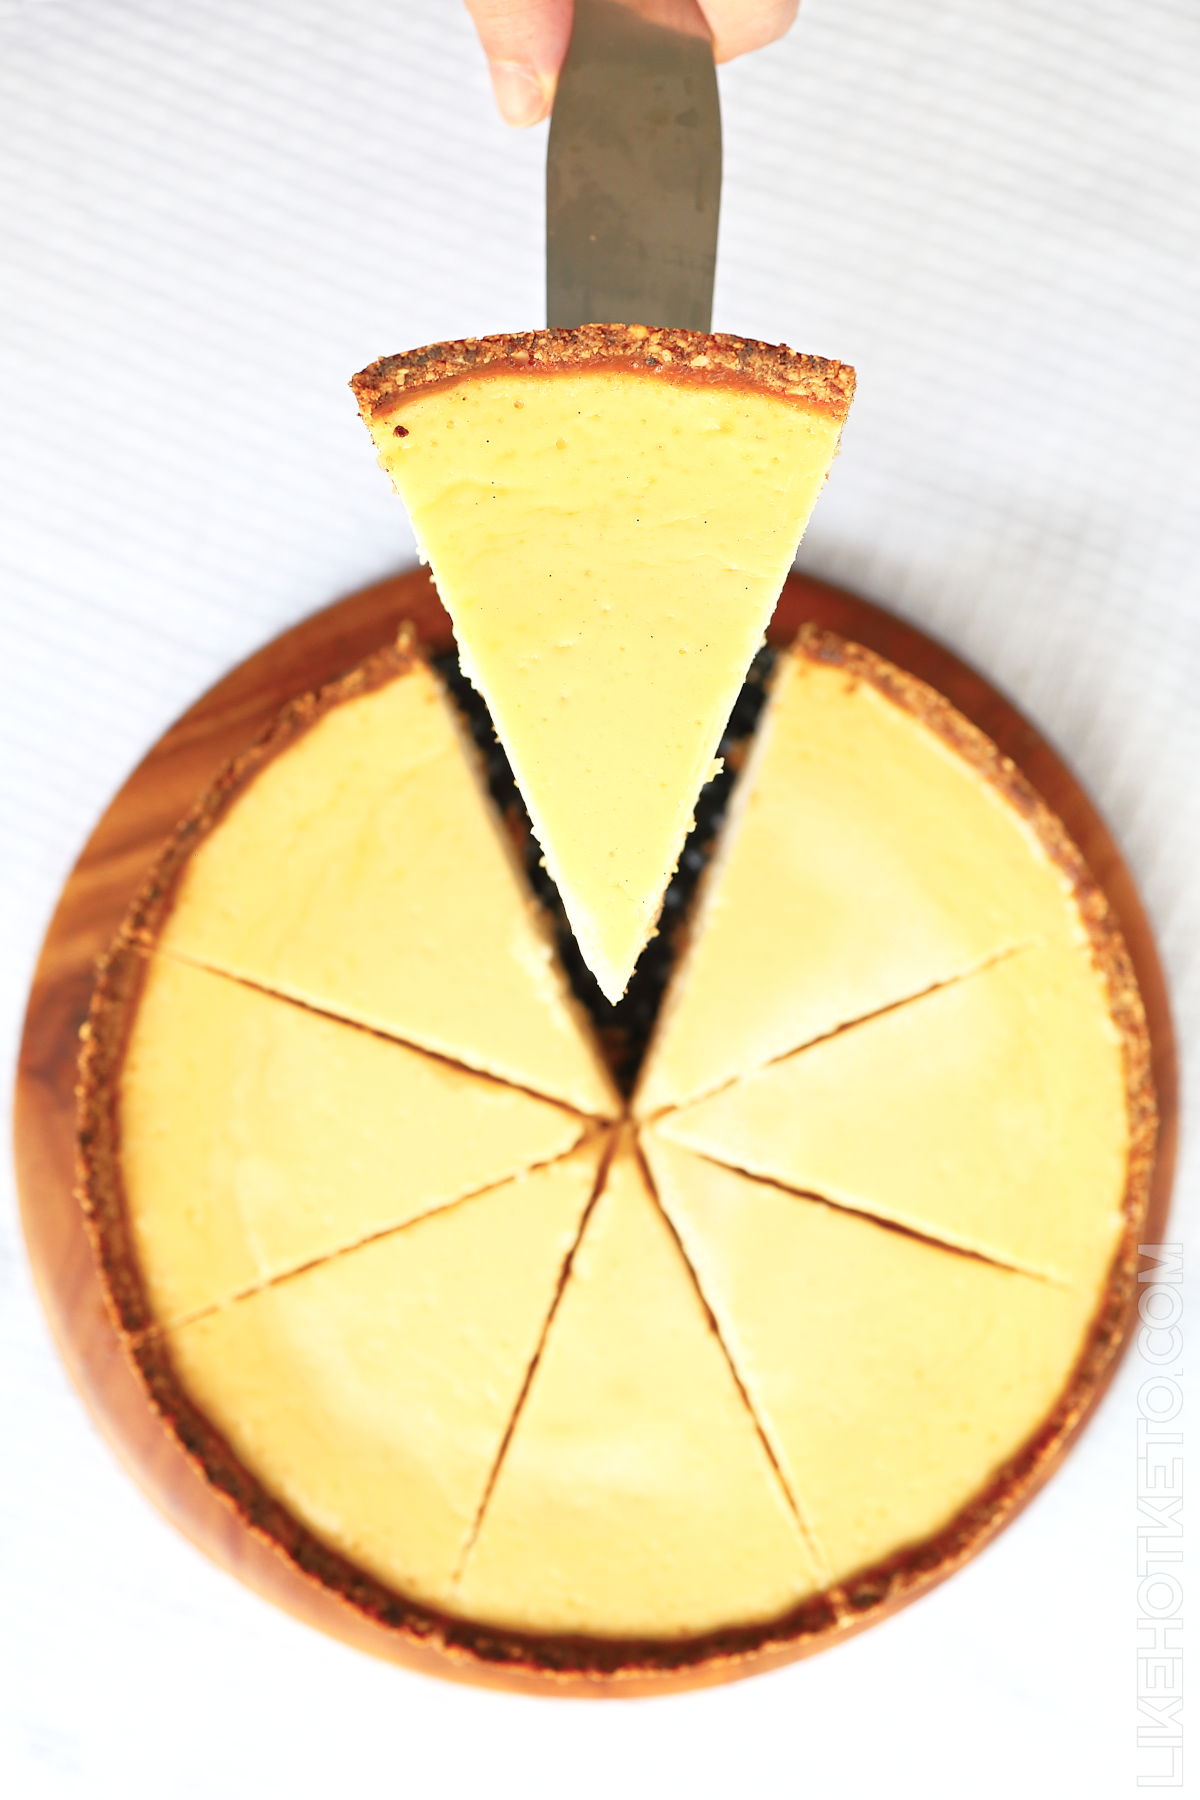 Keto classic vanilla cheesecake just sliced, viewed from the top.